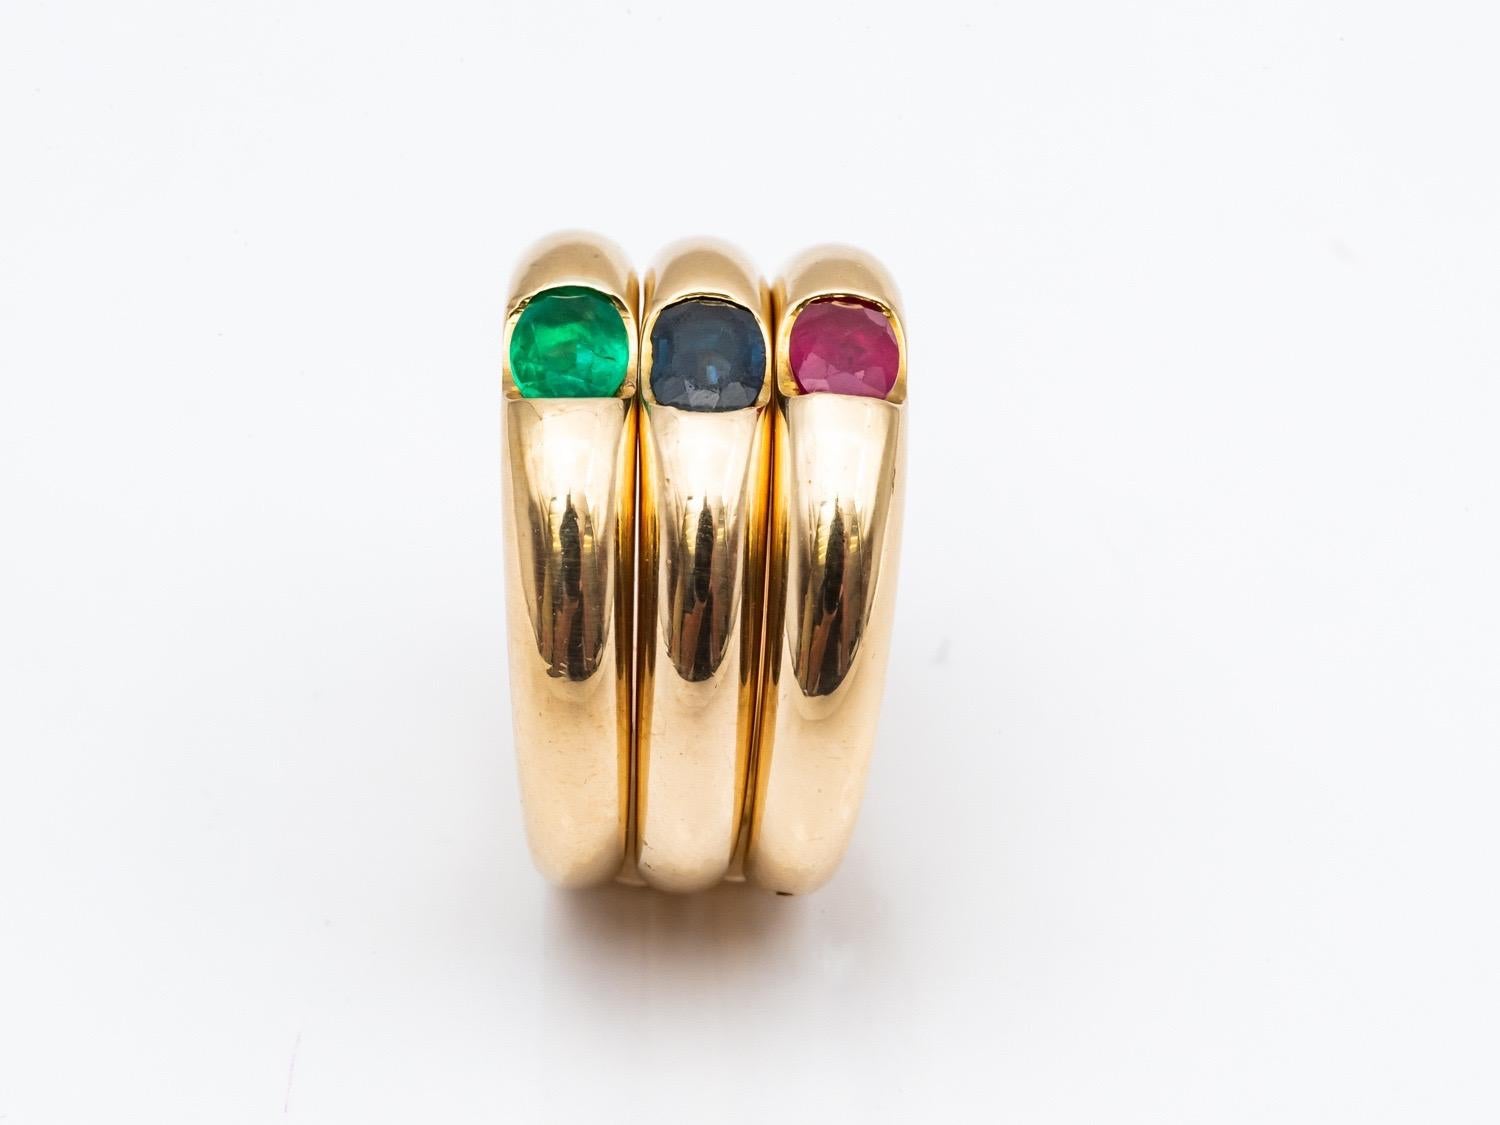 Three 18 Karat Gold Bangles Rings Set with an Emerald, a Sapphire, and a Ruby 10